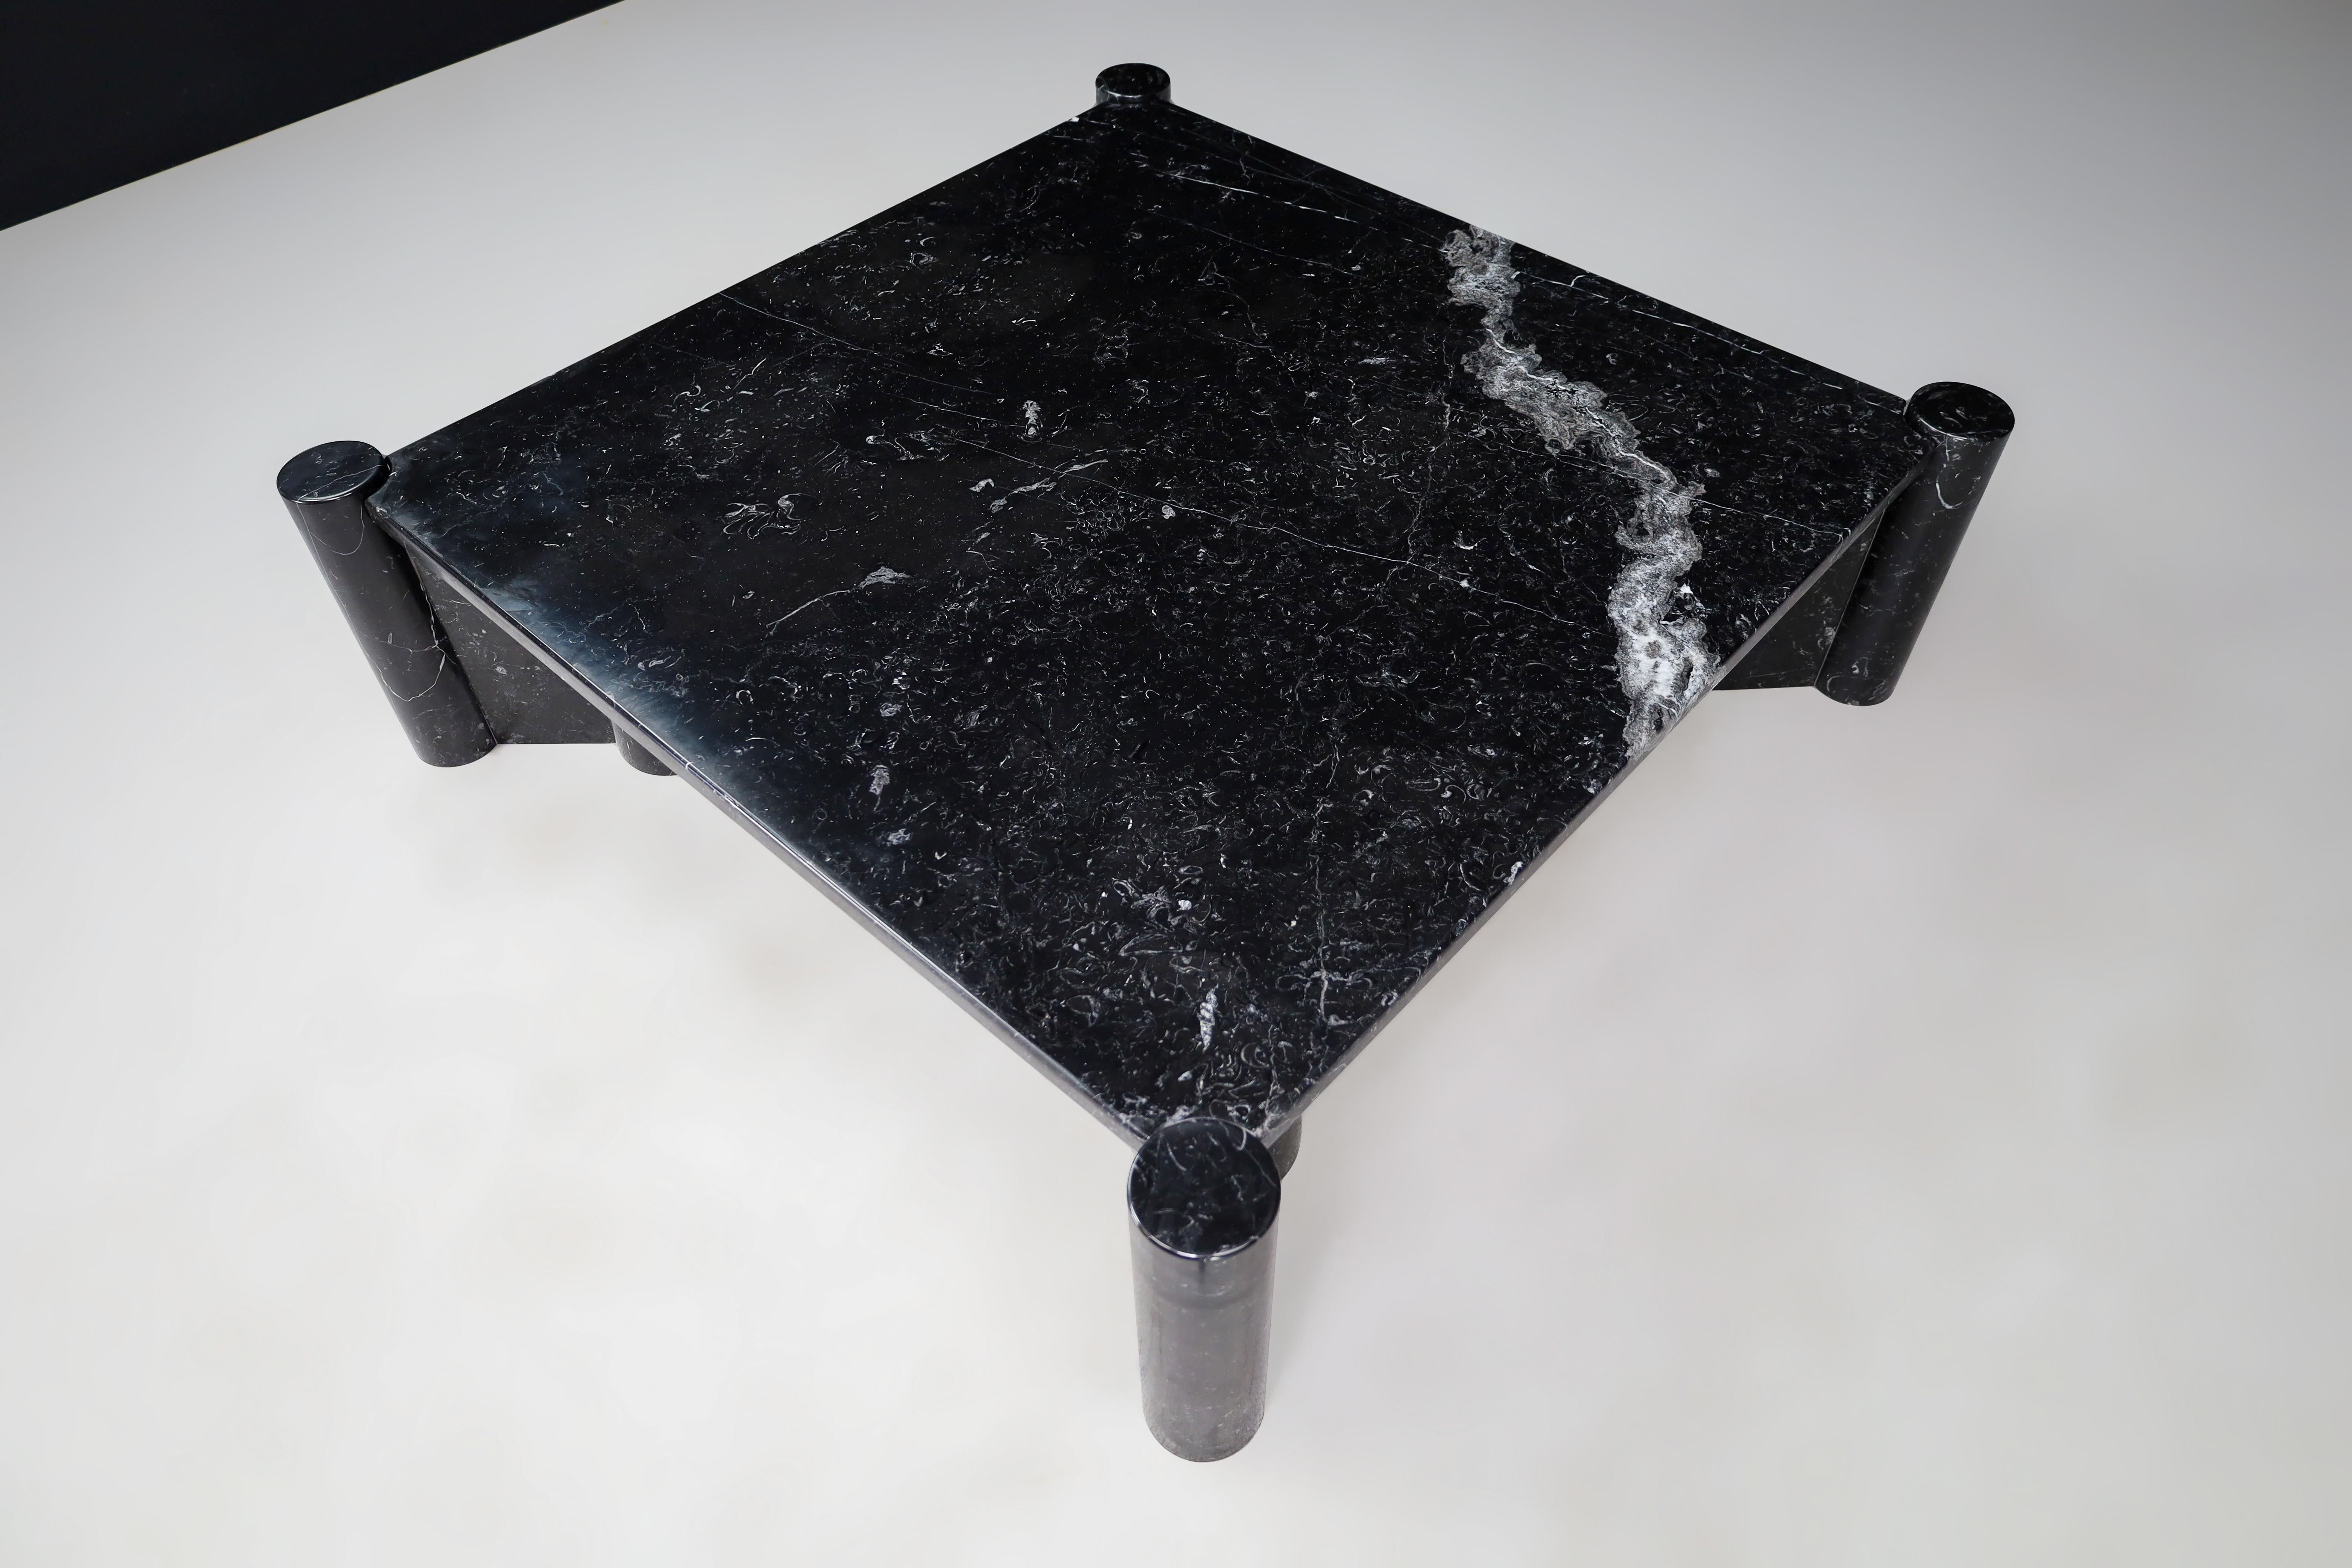 Gae Aulenti Jumbo Coffee Table for Knoll in Black Marquina Marble, Italy 1970s   1